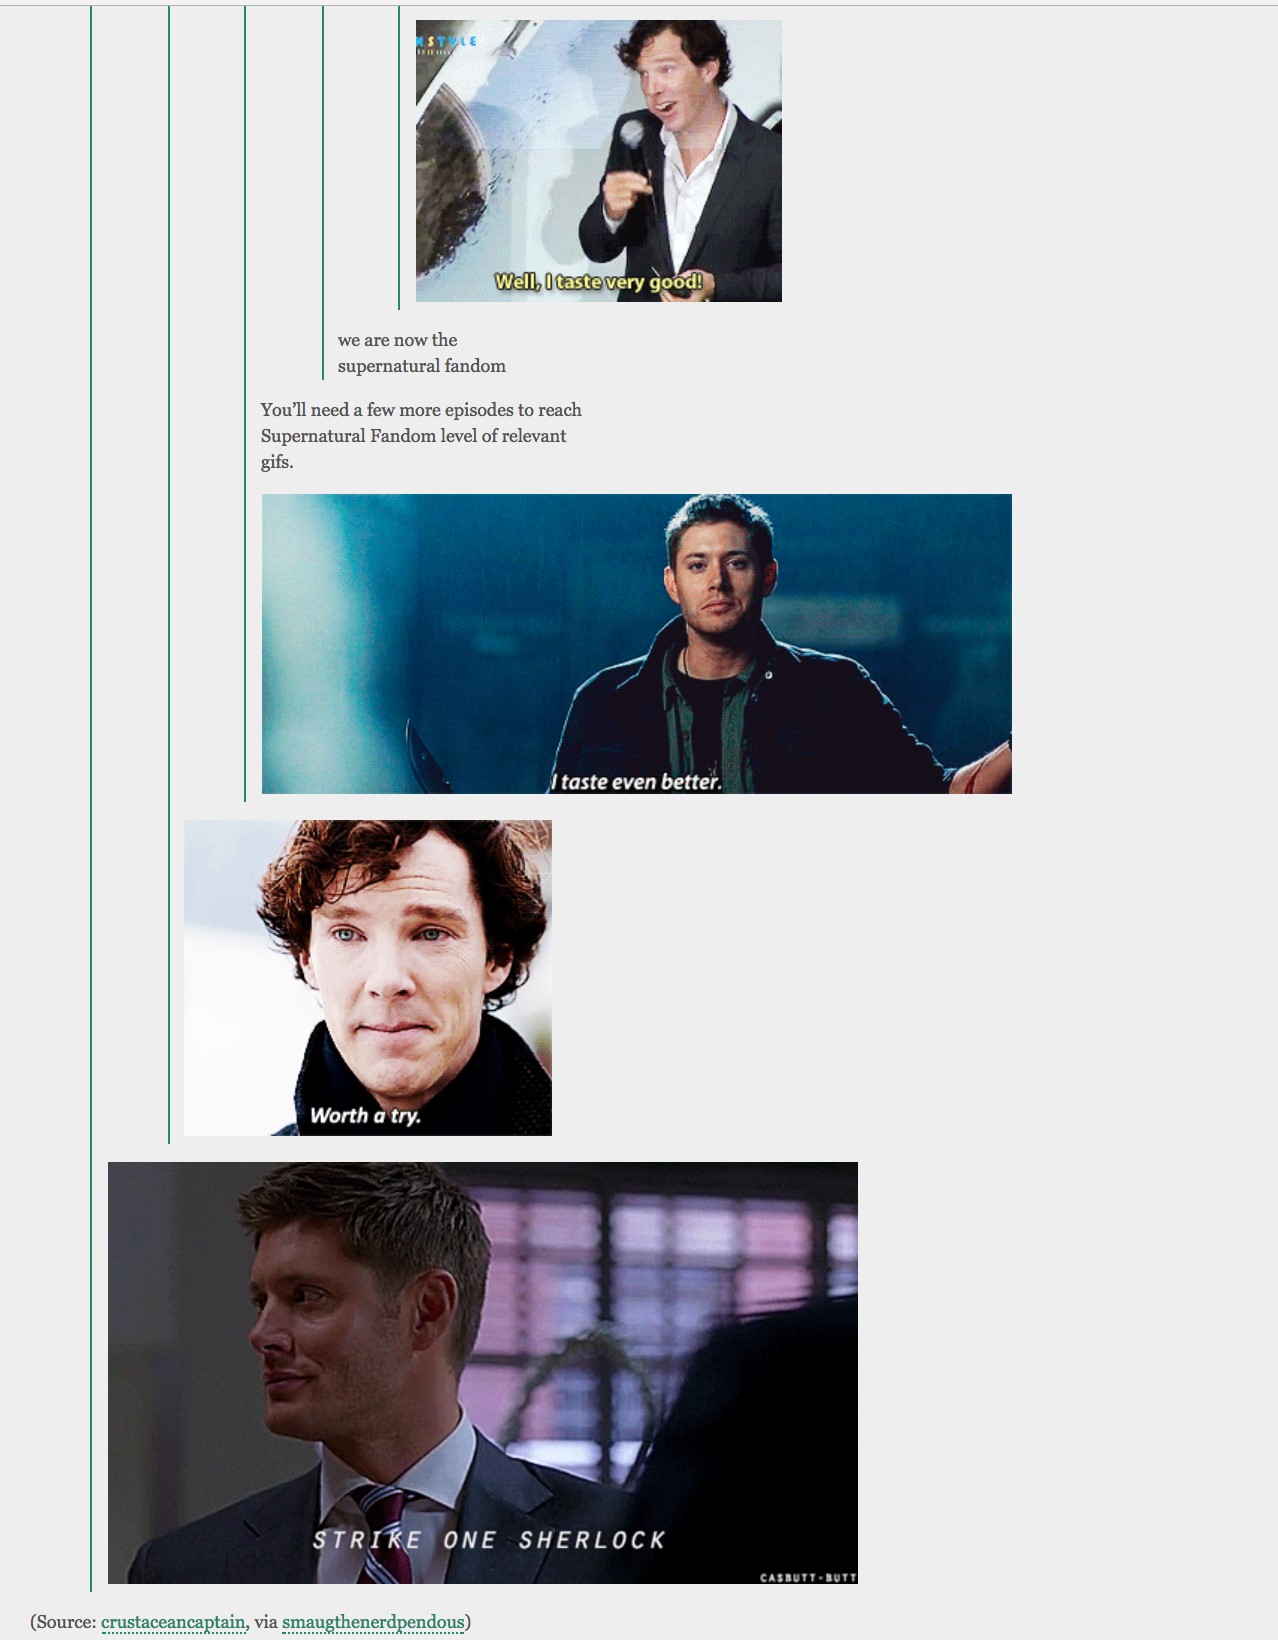 The first GIF is of Benedict Cumberbatch with the caption 'Well, I taste very good.' Beneath the GIF is the text 'we are now the supernatural fandom.' A Supernatural fan responds with 'You'll need a few more episodes to reach Supernatural Fandom level of relevant gifs.' The second GIF is of Jensen Ackles as Dean with the caption 'I taste even better.' The third is of Cumberbatch as Sherlock with the caption 'Worth a try.' The last GIF is of Ackles as Dean with the caption 'Strike one Sherlock.'